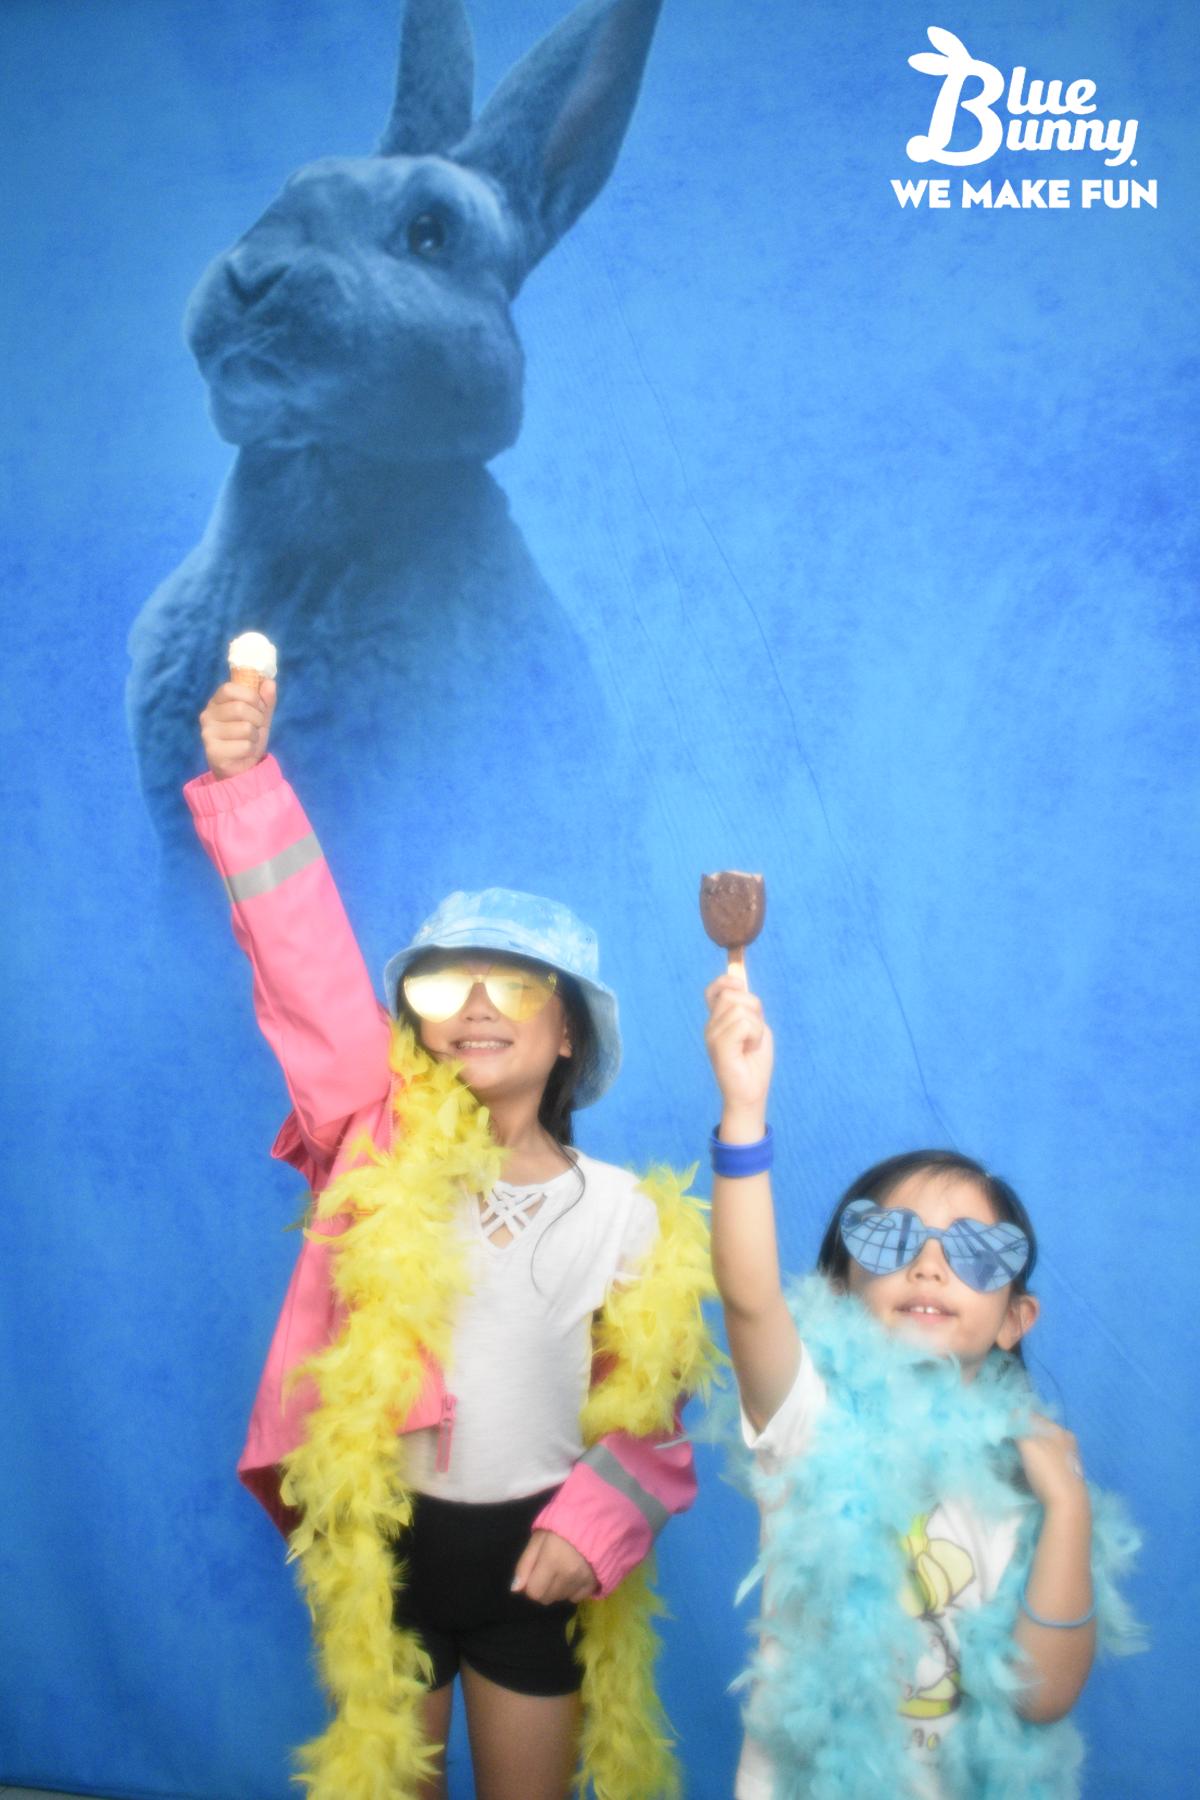 Two young girls holding mini icecream novelties in the air above their heads